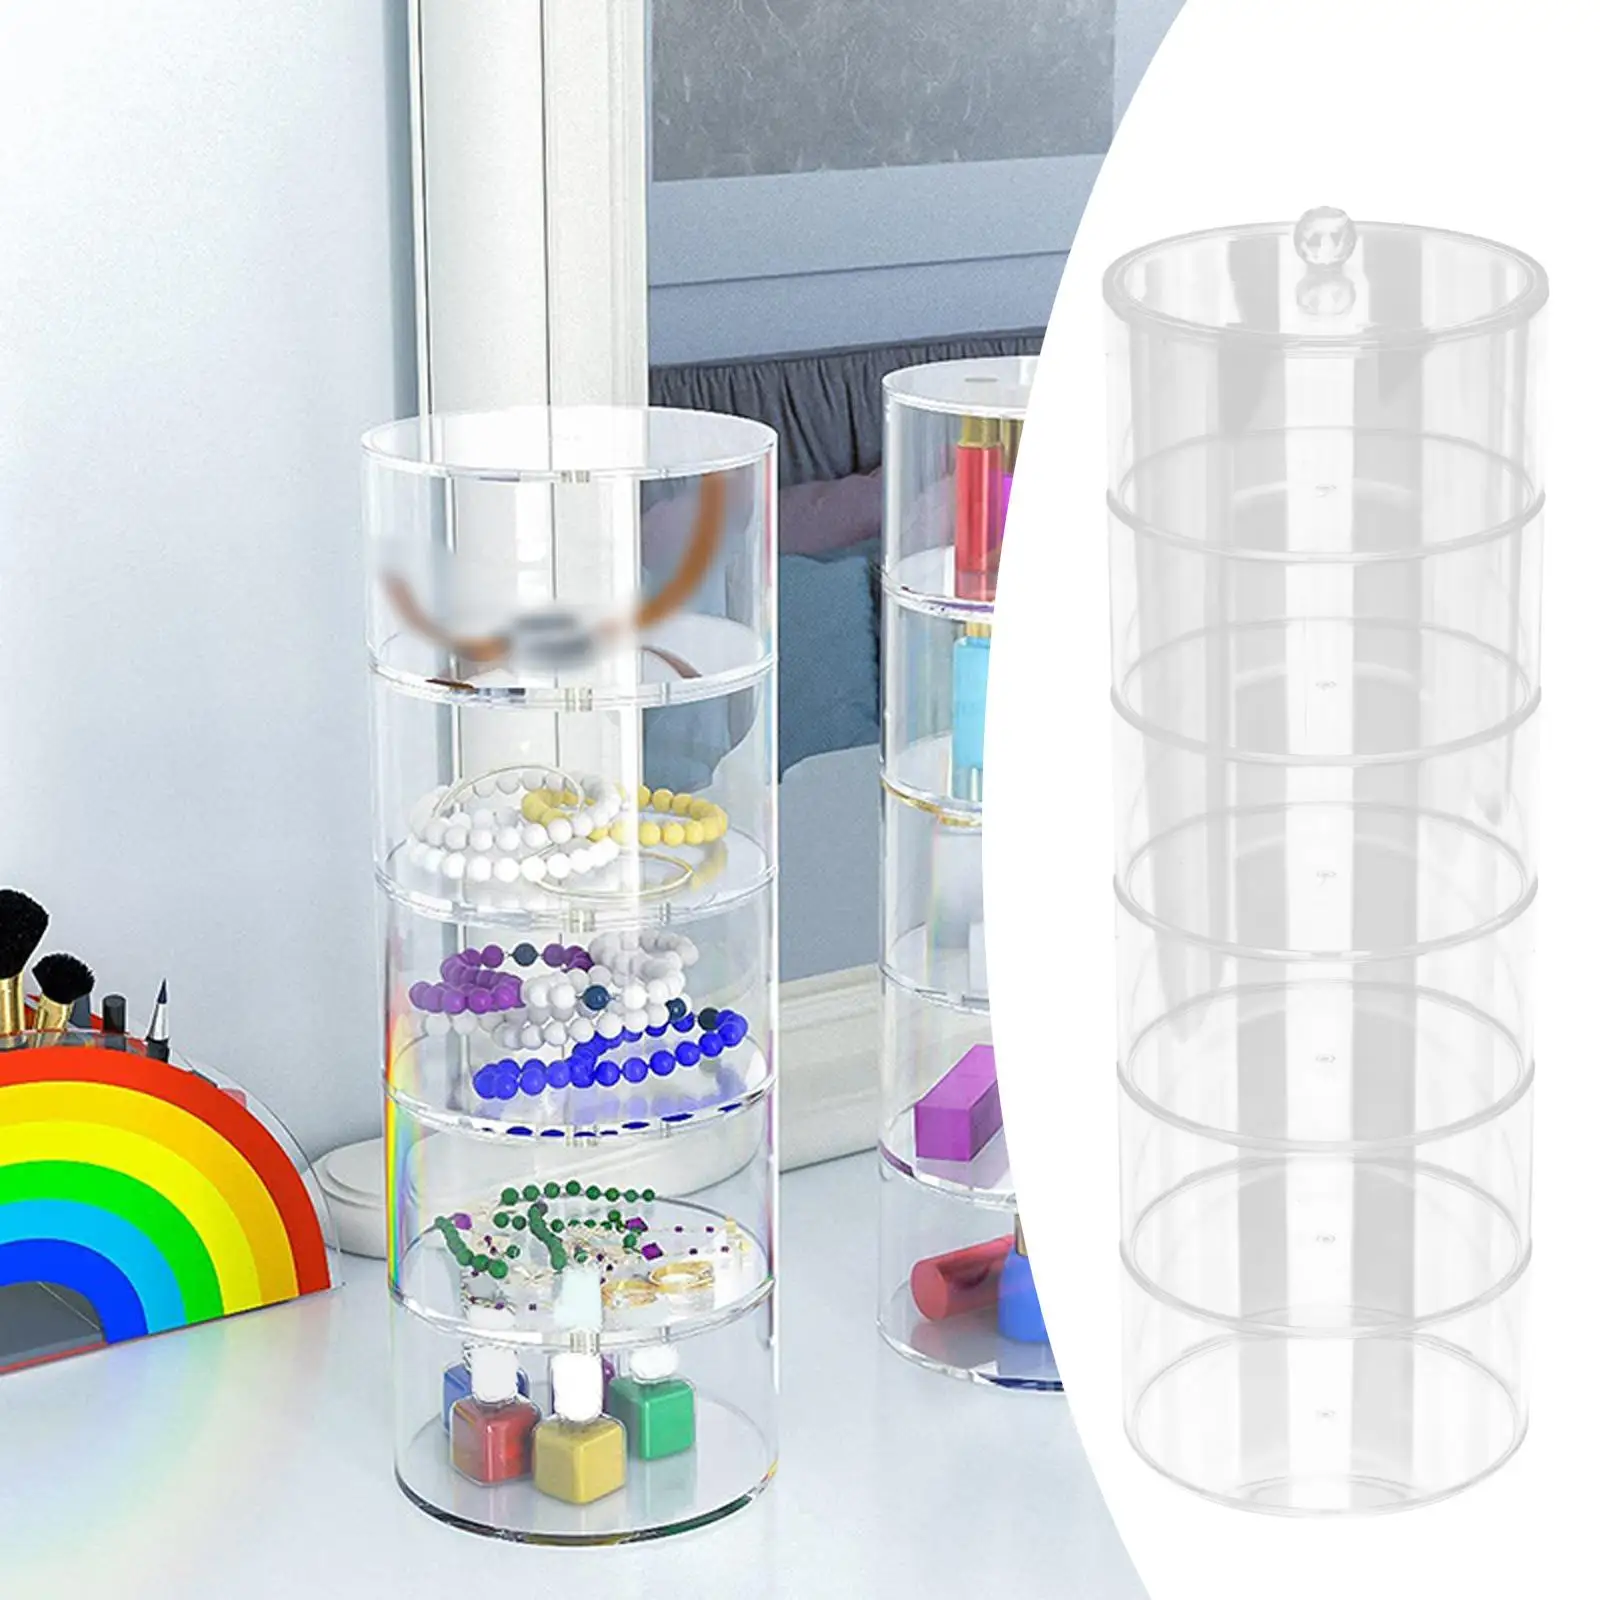 Showcase Multi Functional Stackable Clear Dustproof Cylindrical Belt Storage Box Acrylic Organizer Box for Desktop Living Room